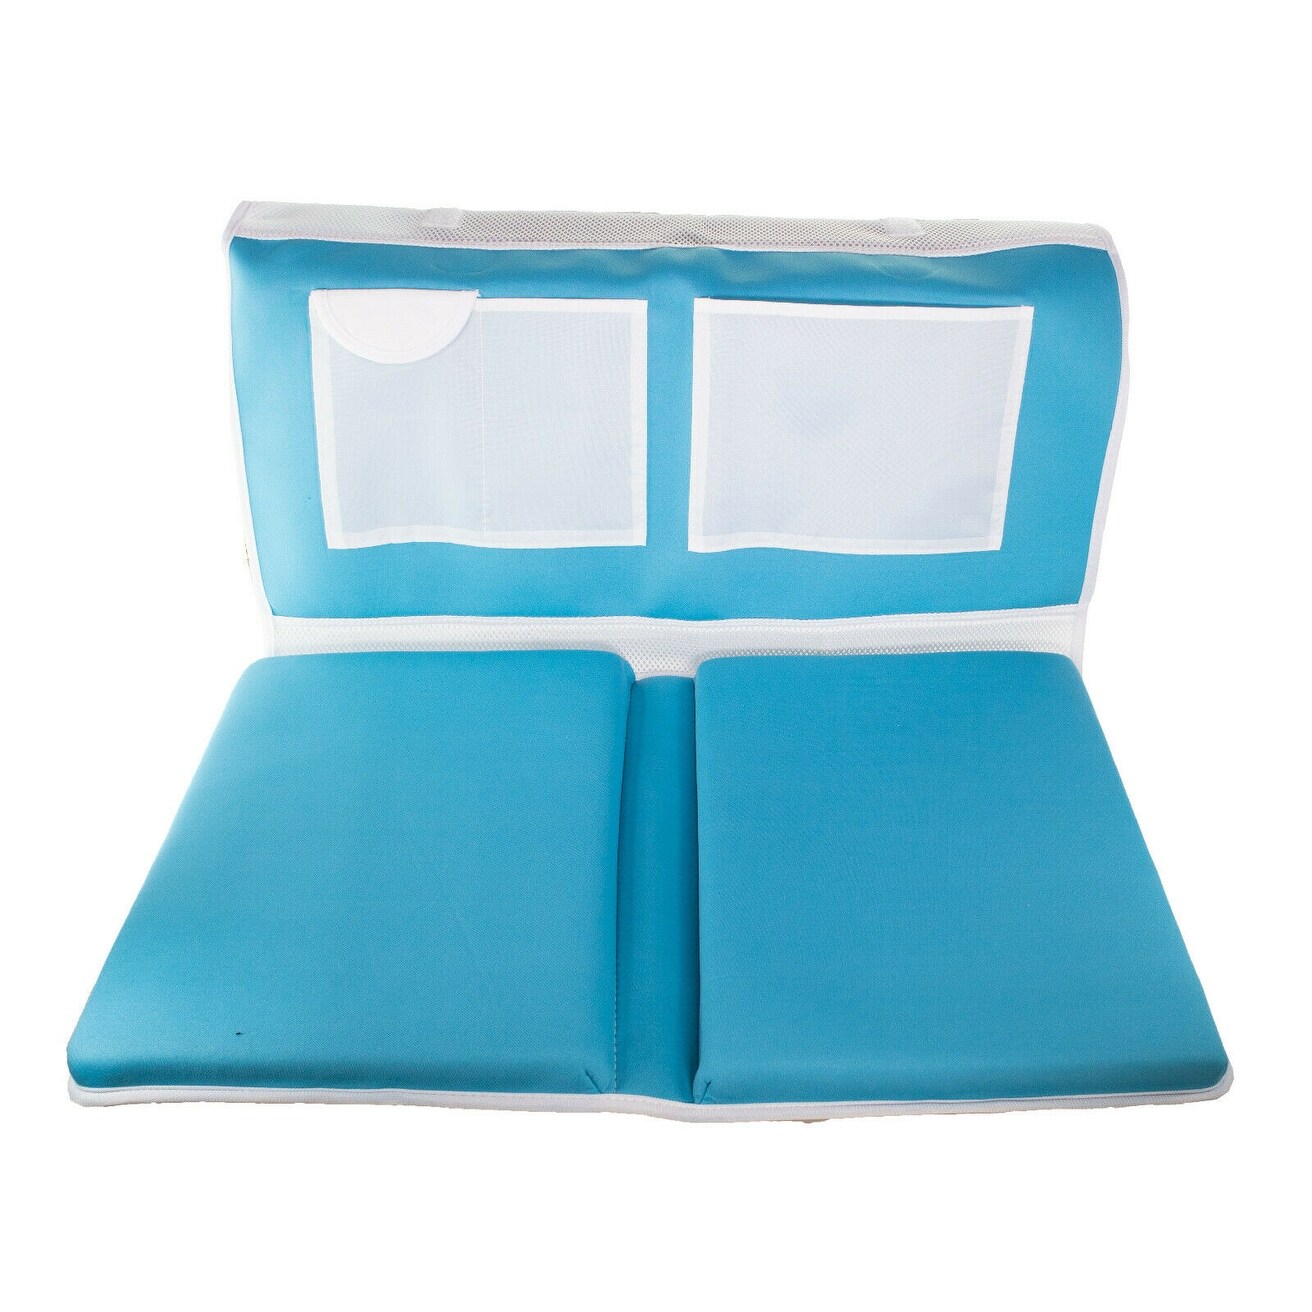 https://ak1.ostkcdn.com/images/products/is/images/direct/c8ae399f8e249afb57a2e6357f274d60c0cc7bdd/Bath-Kneeler-Pad-%26-Elbow-Armrest-Mat-Foldable-Non-Slip-Safety-Bathtube-Cushion.jpg